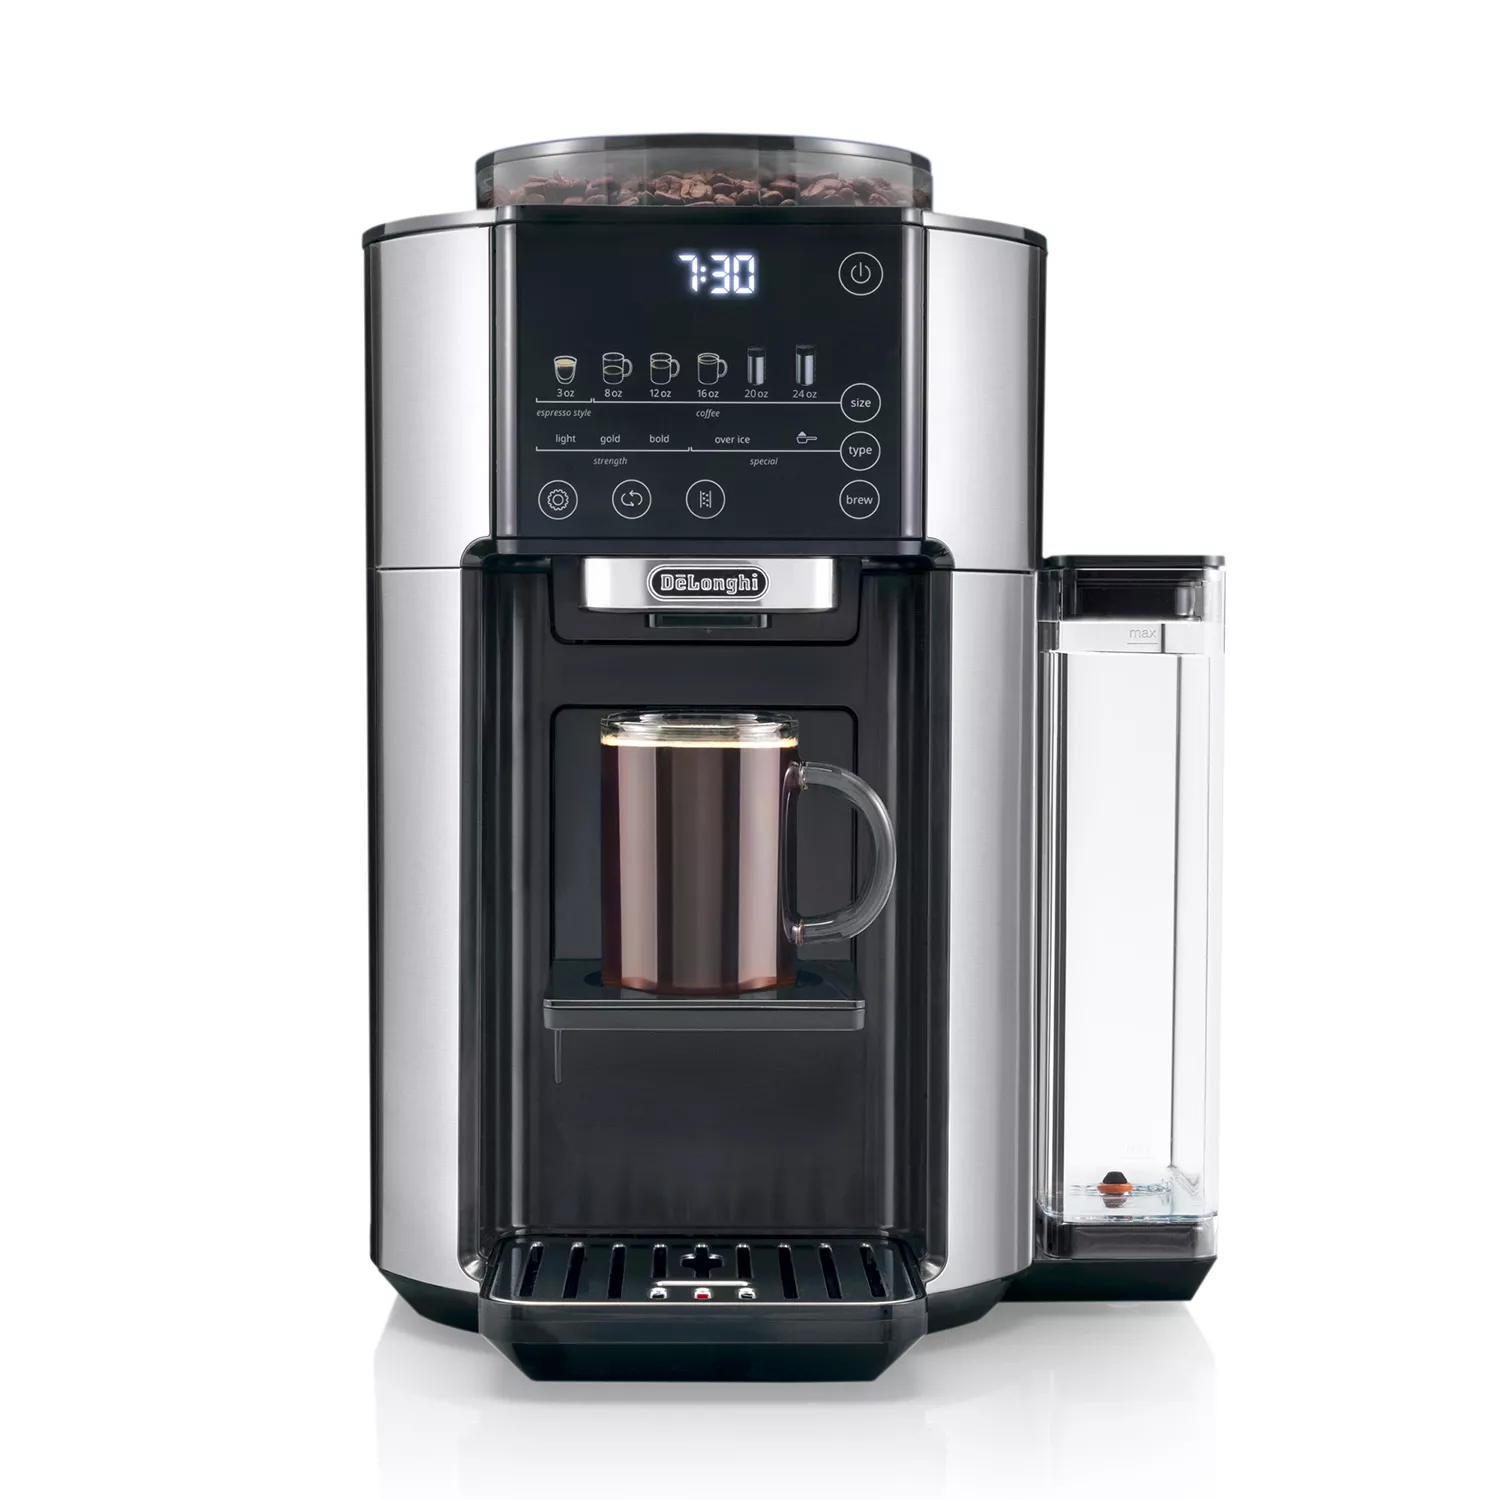 The newest Instant Pot innovation? A coffee and espresso maker in